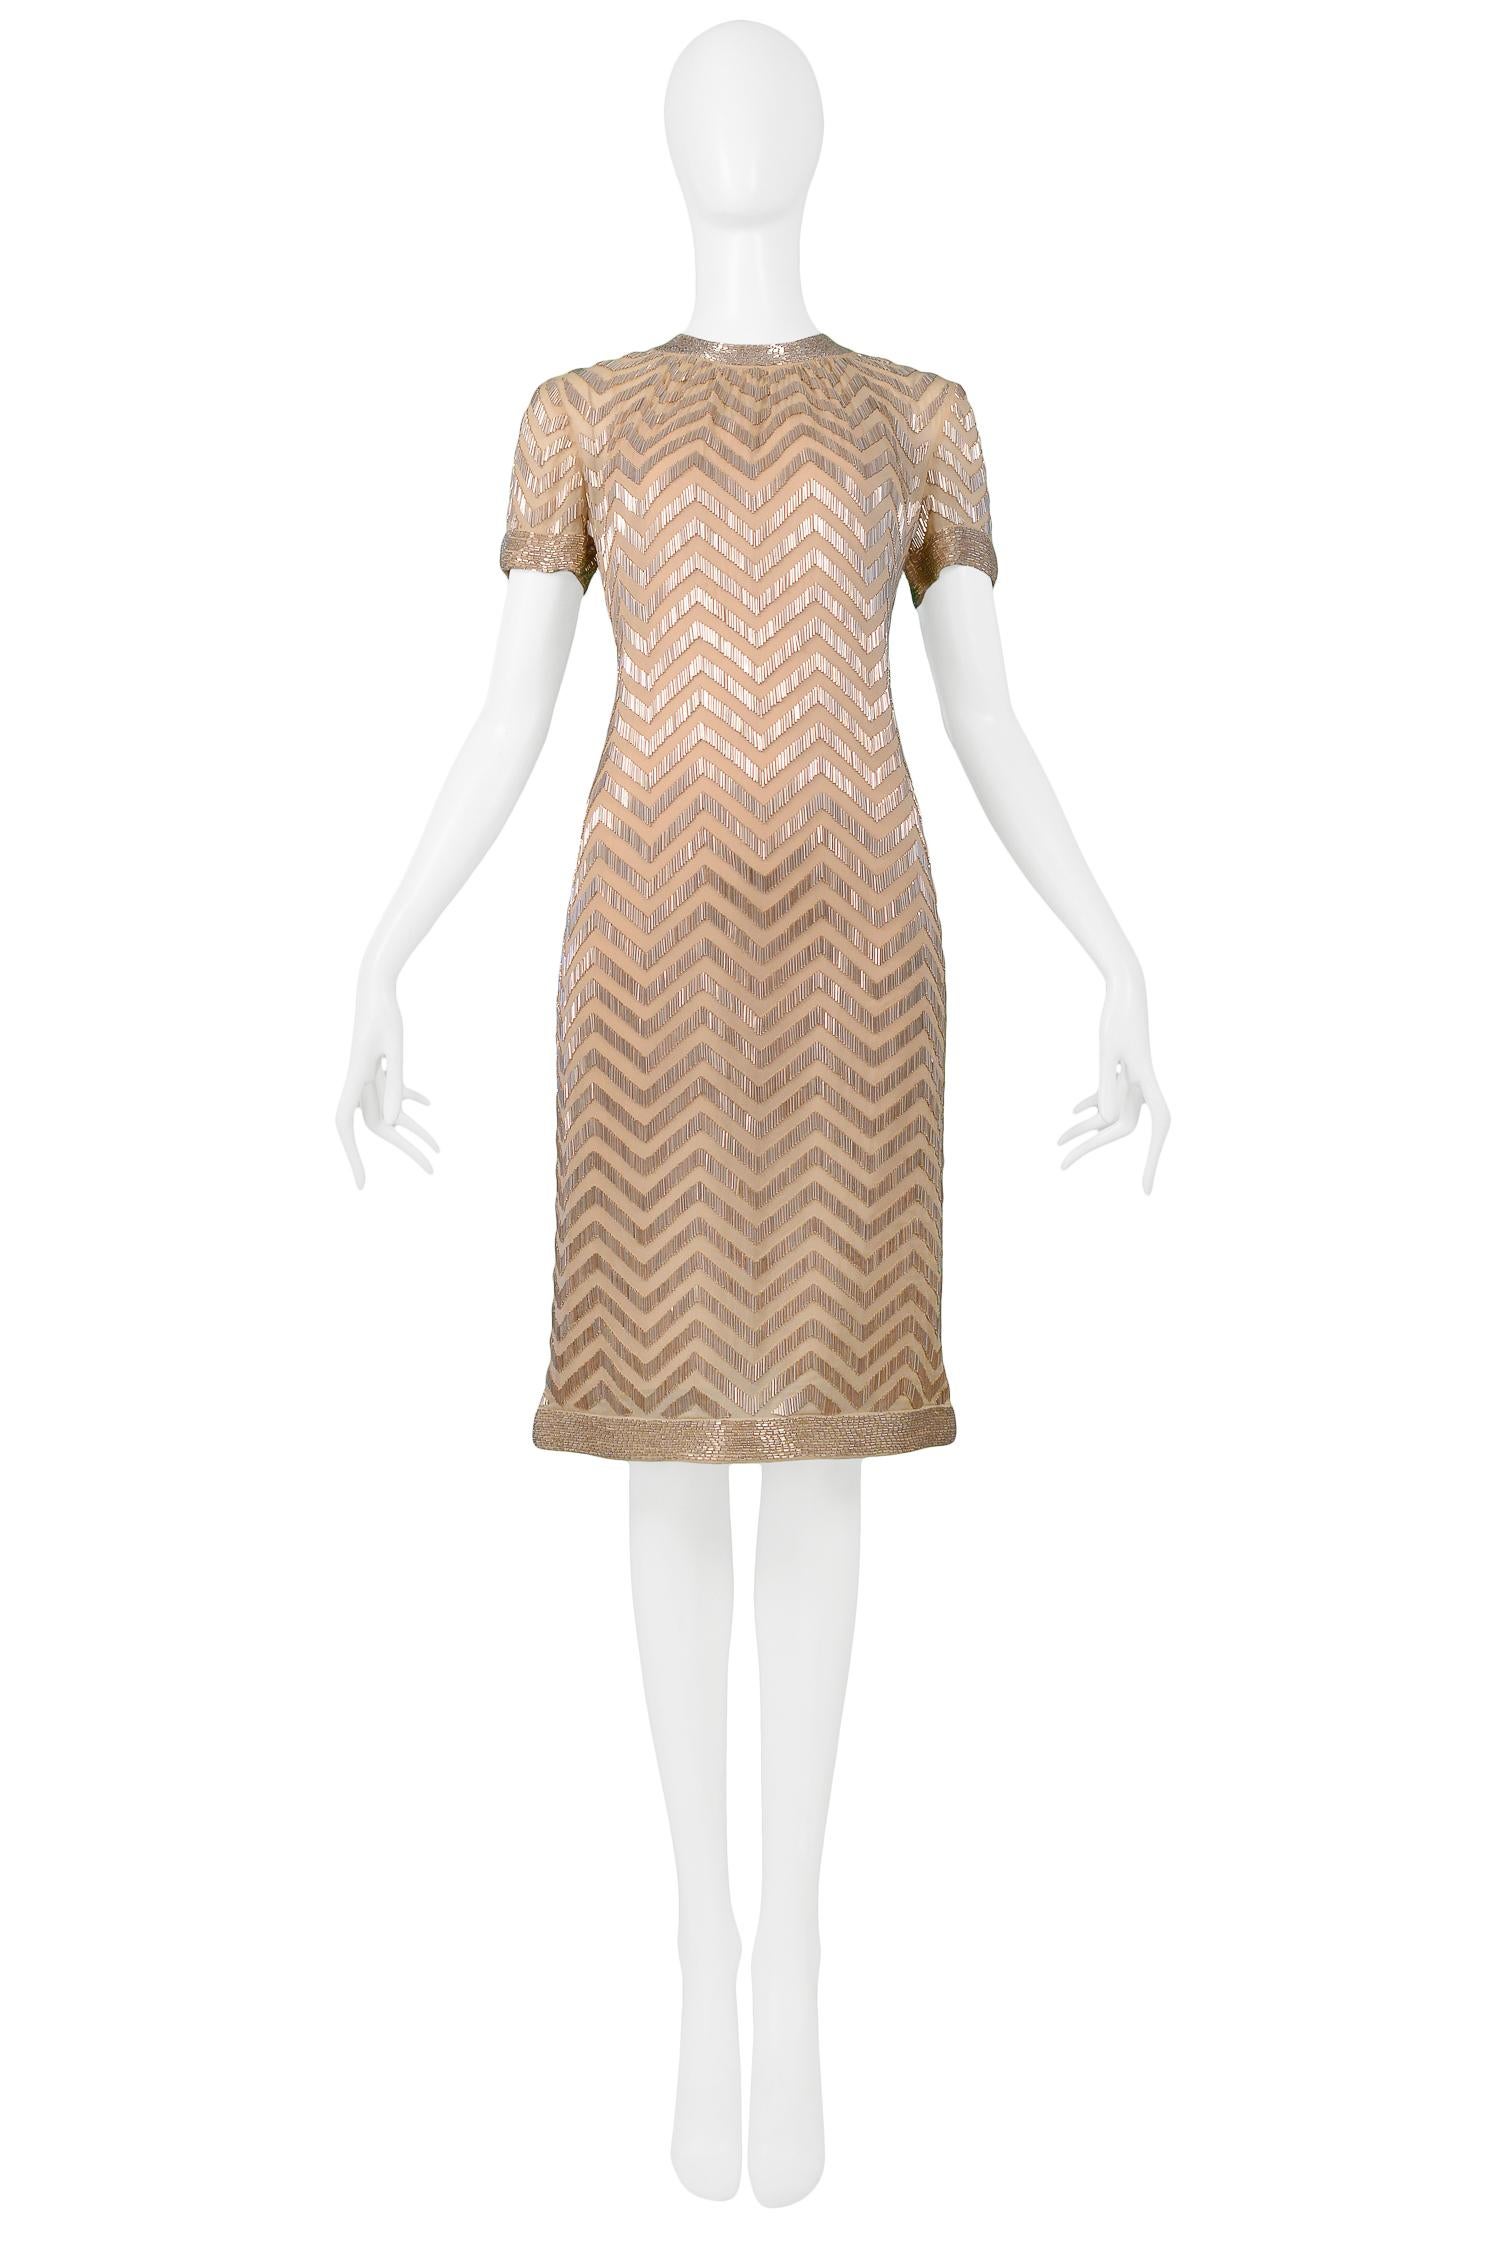 Vintage Donald Brooks short sleeve cocktail dress featuring gold chevron pattern beading atop a nude chiffon lining and back zipper closure. Circa 1960's.

Excellent Vintage Condition
Size 2